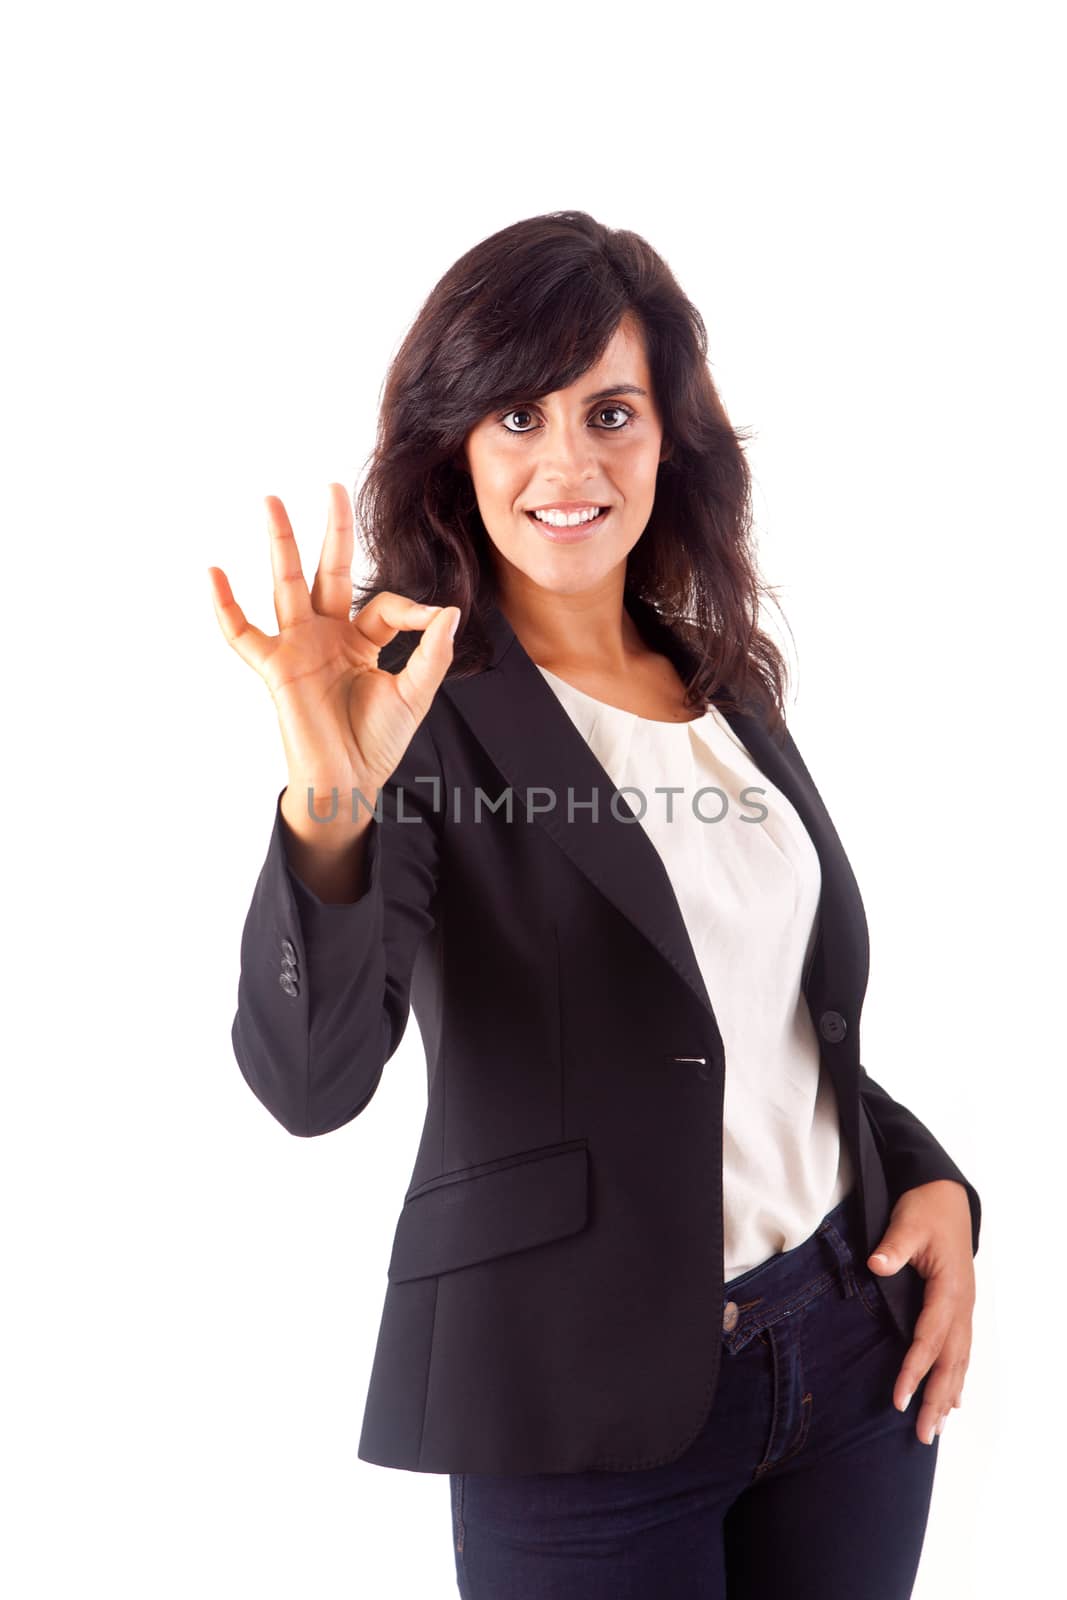 Smiling woman doing the OK sign over white background